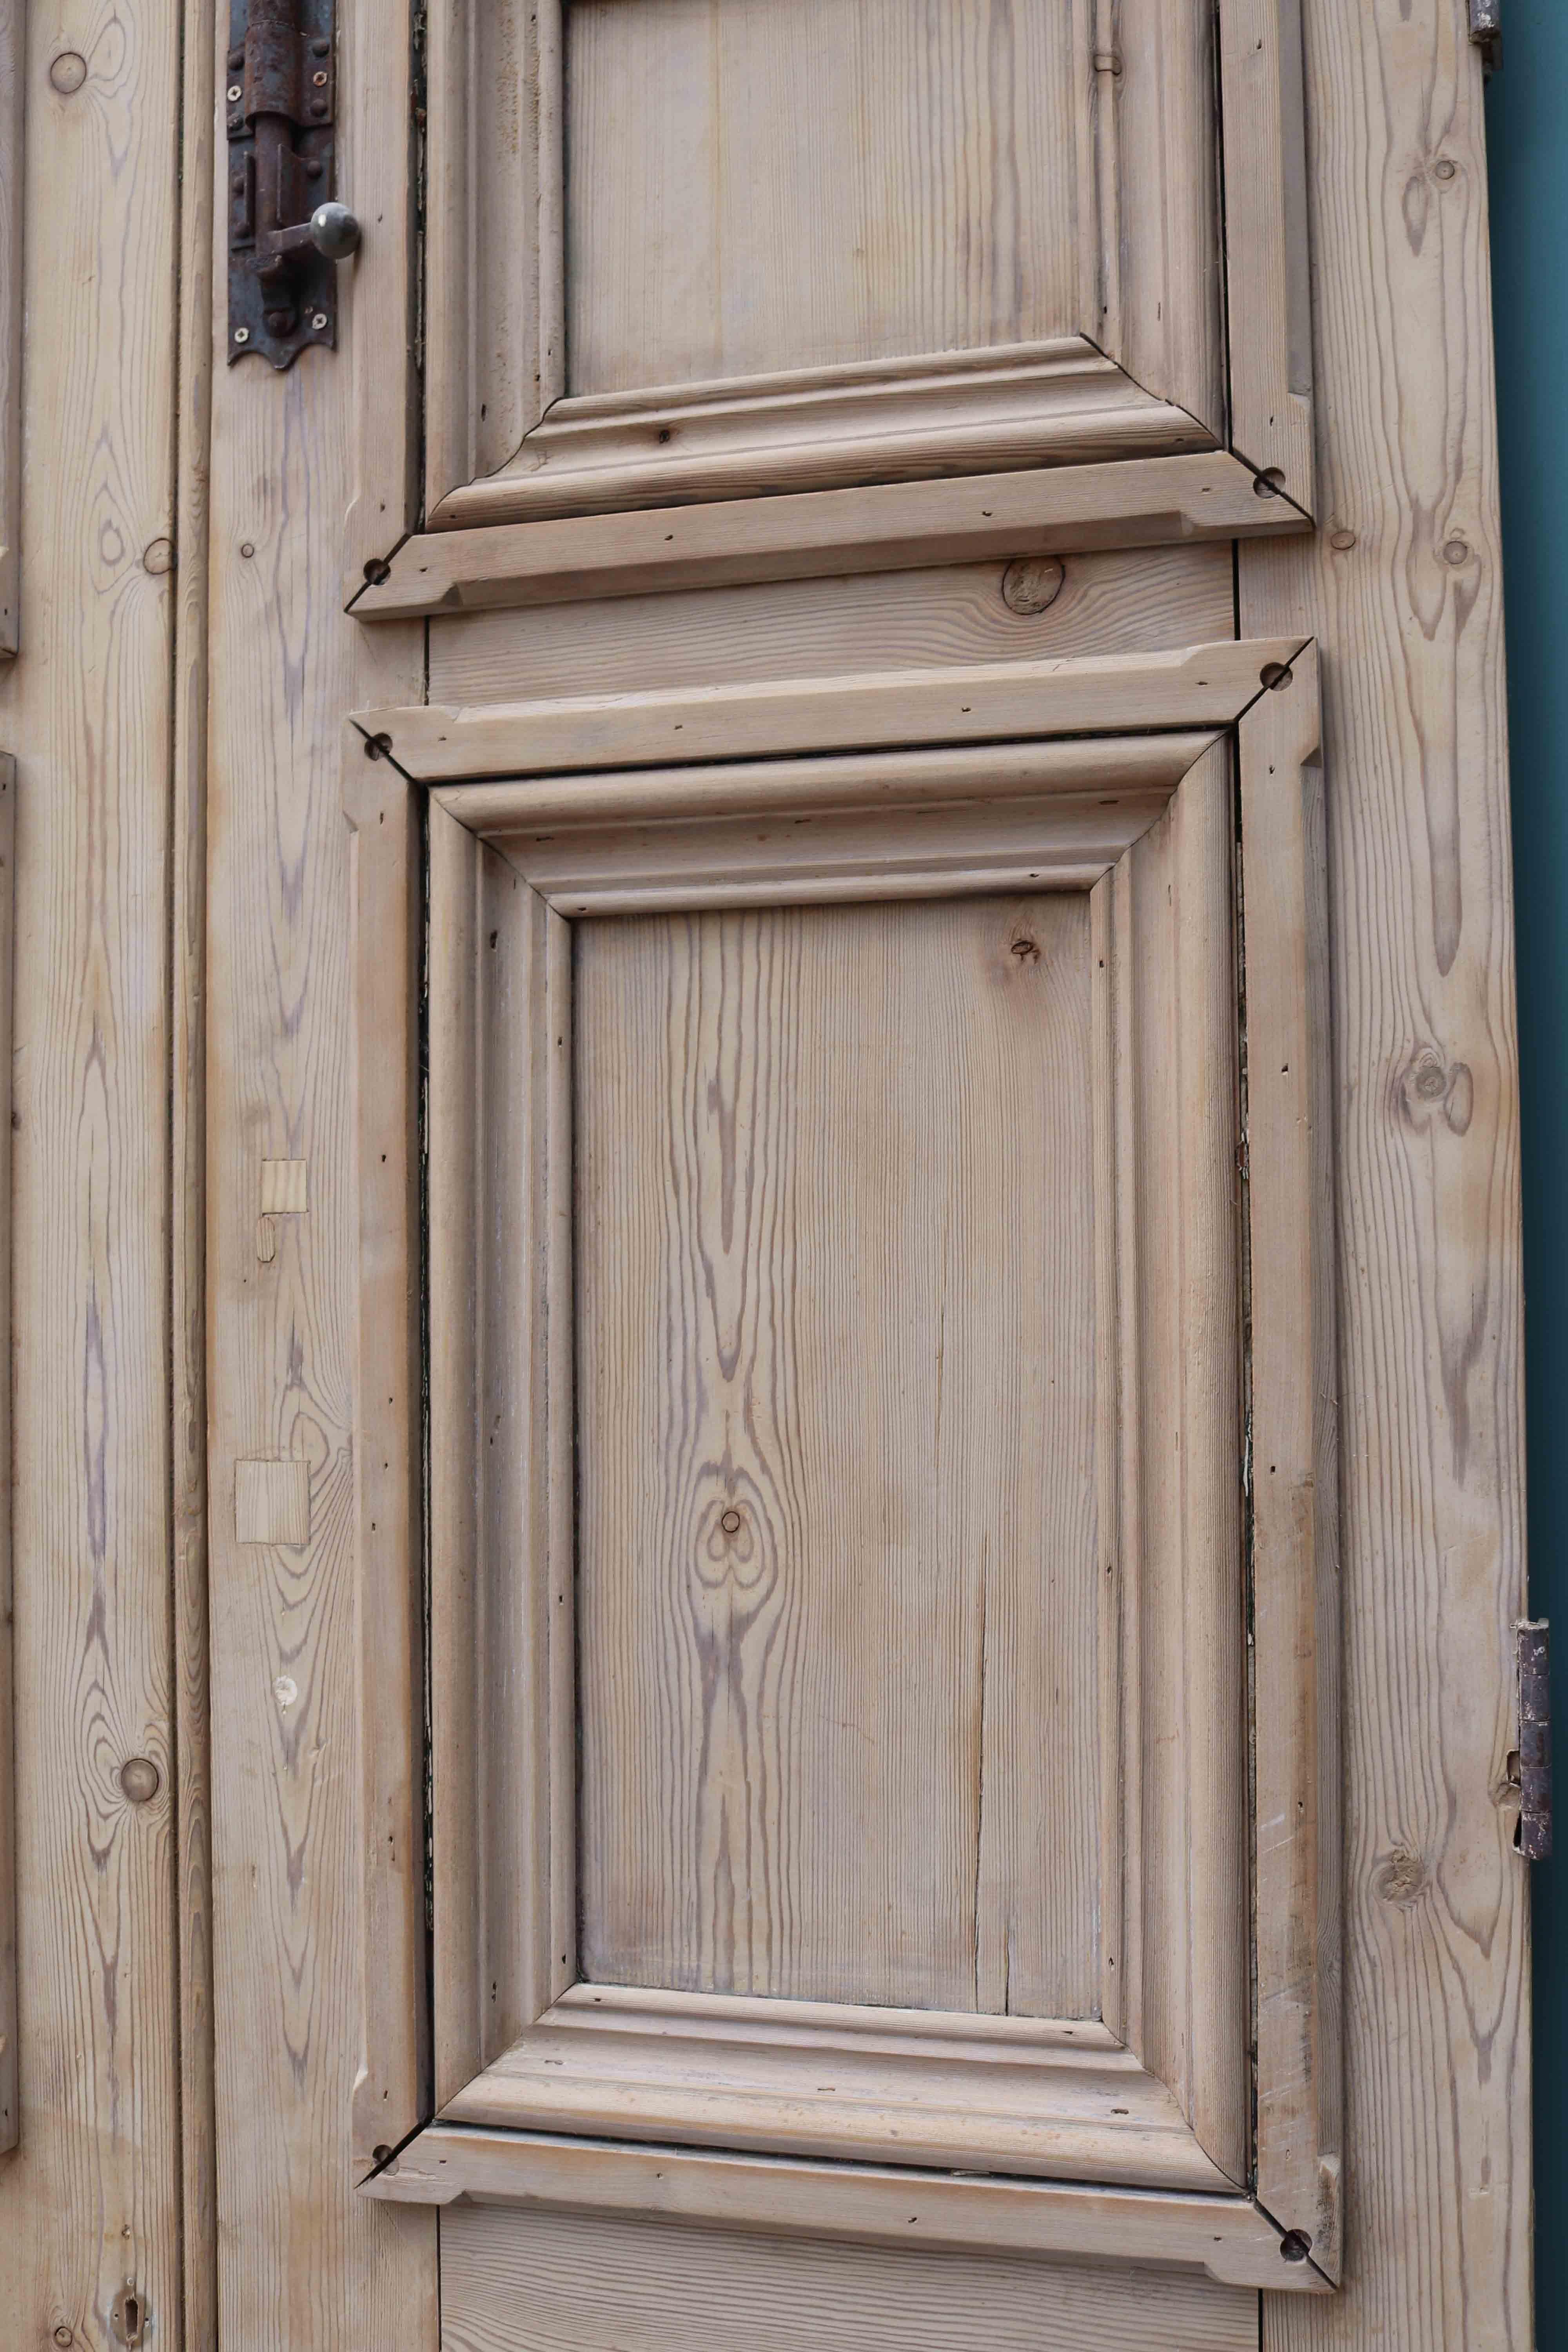 About

A set of exterior double doors reclaimed from a property in Exeter.

Condition report

Doors are in good structural condition, they have been stripped and sanded. The doors are rebated and there are decorative moldings to the front.